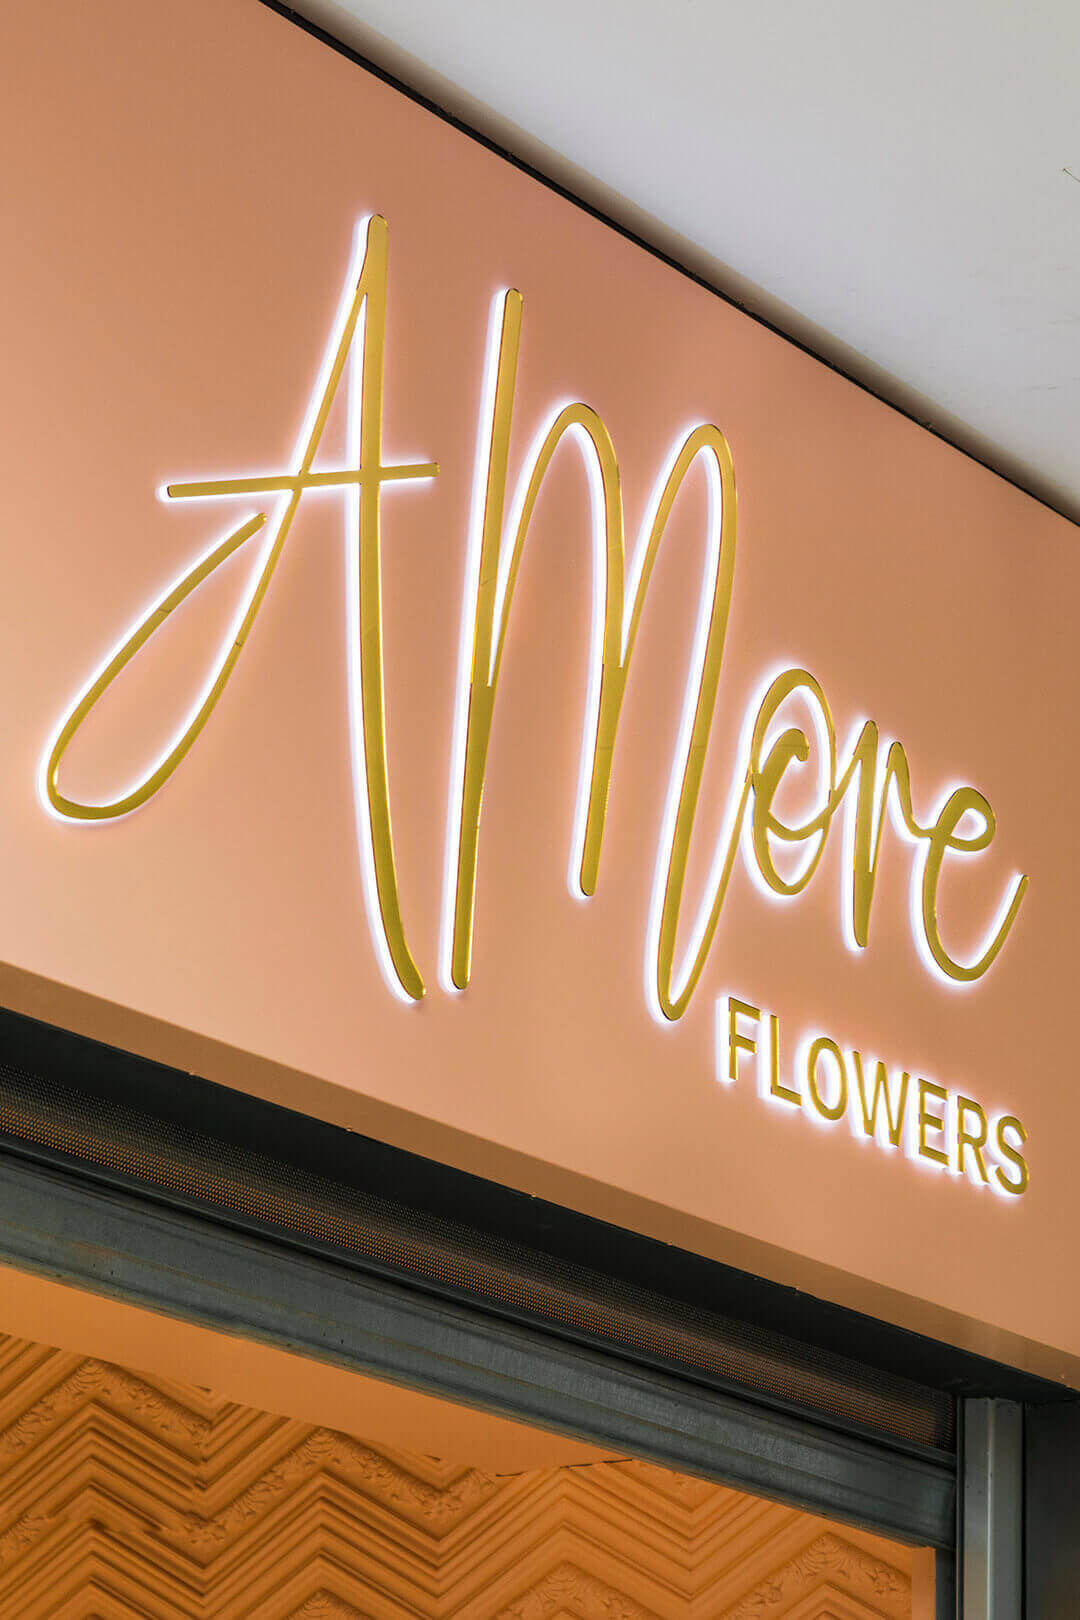 amore fiore amor flave - amore-flowers-casette-gdynia-riviera-casette-gold-letters-illuminated-coffer-casette-over-store-casette-over-entry-morelowe-florist (11) 